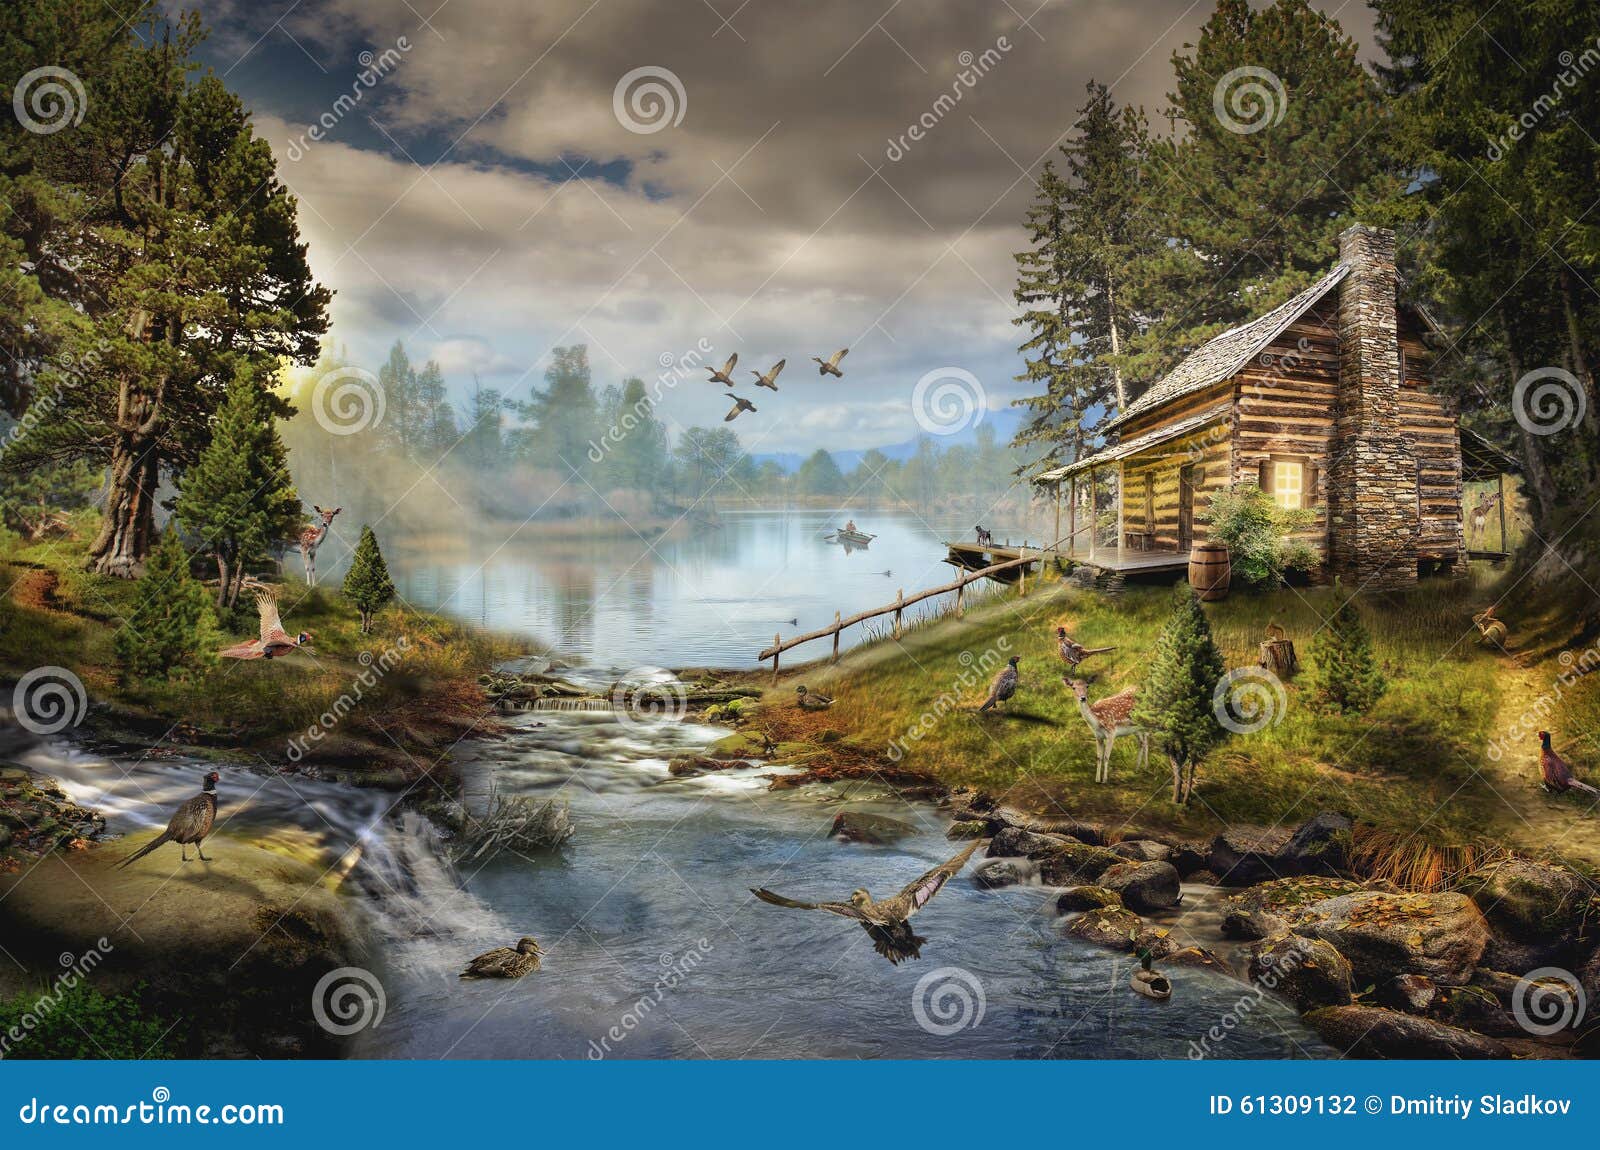 House By The Creek Stock Photo - Image: 61309132